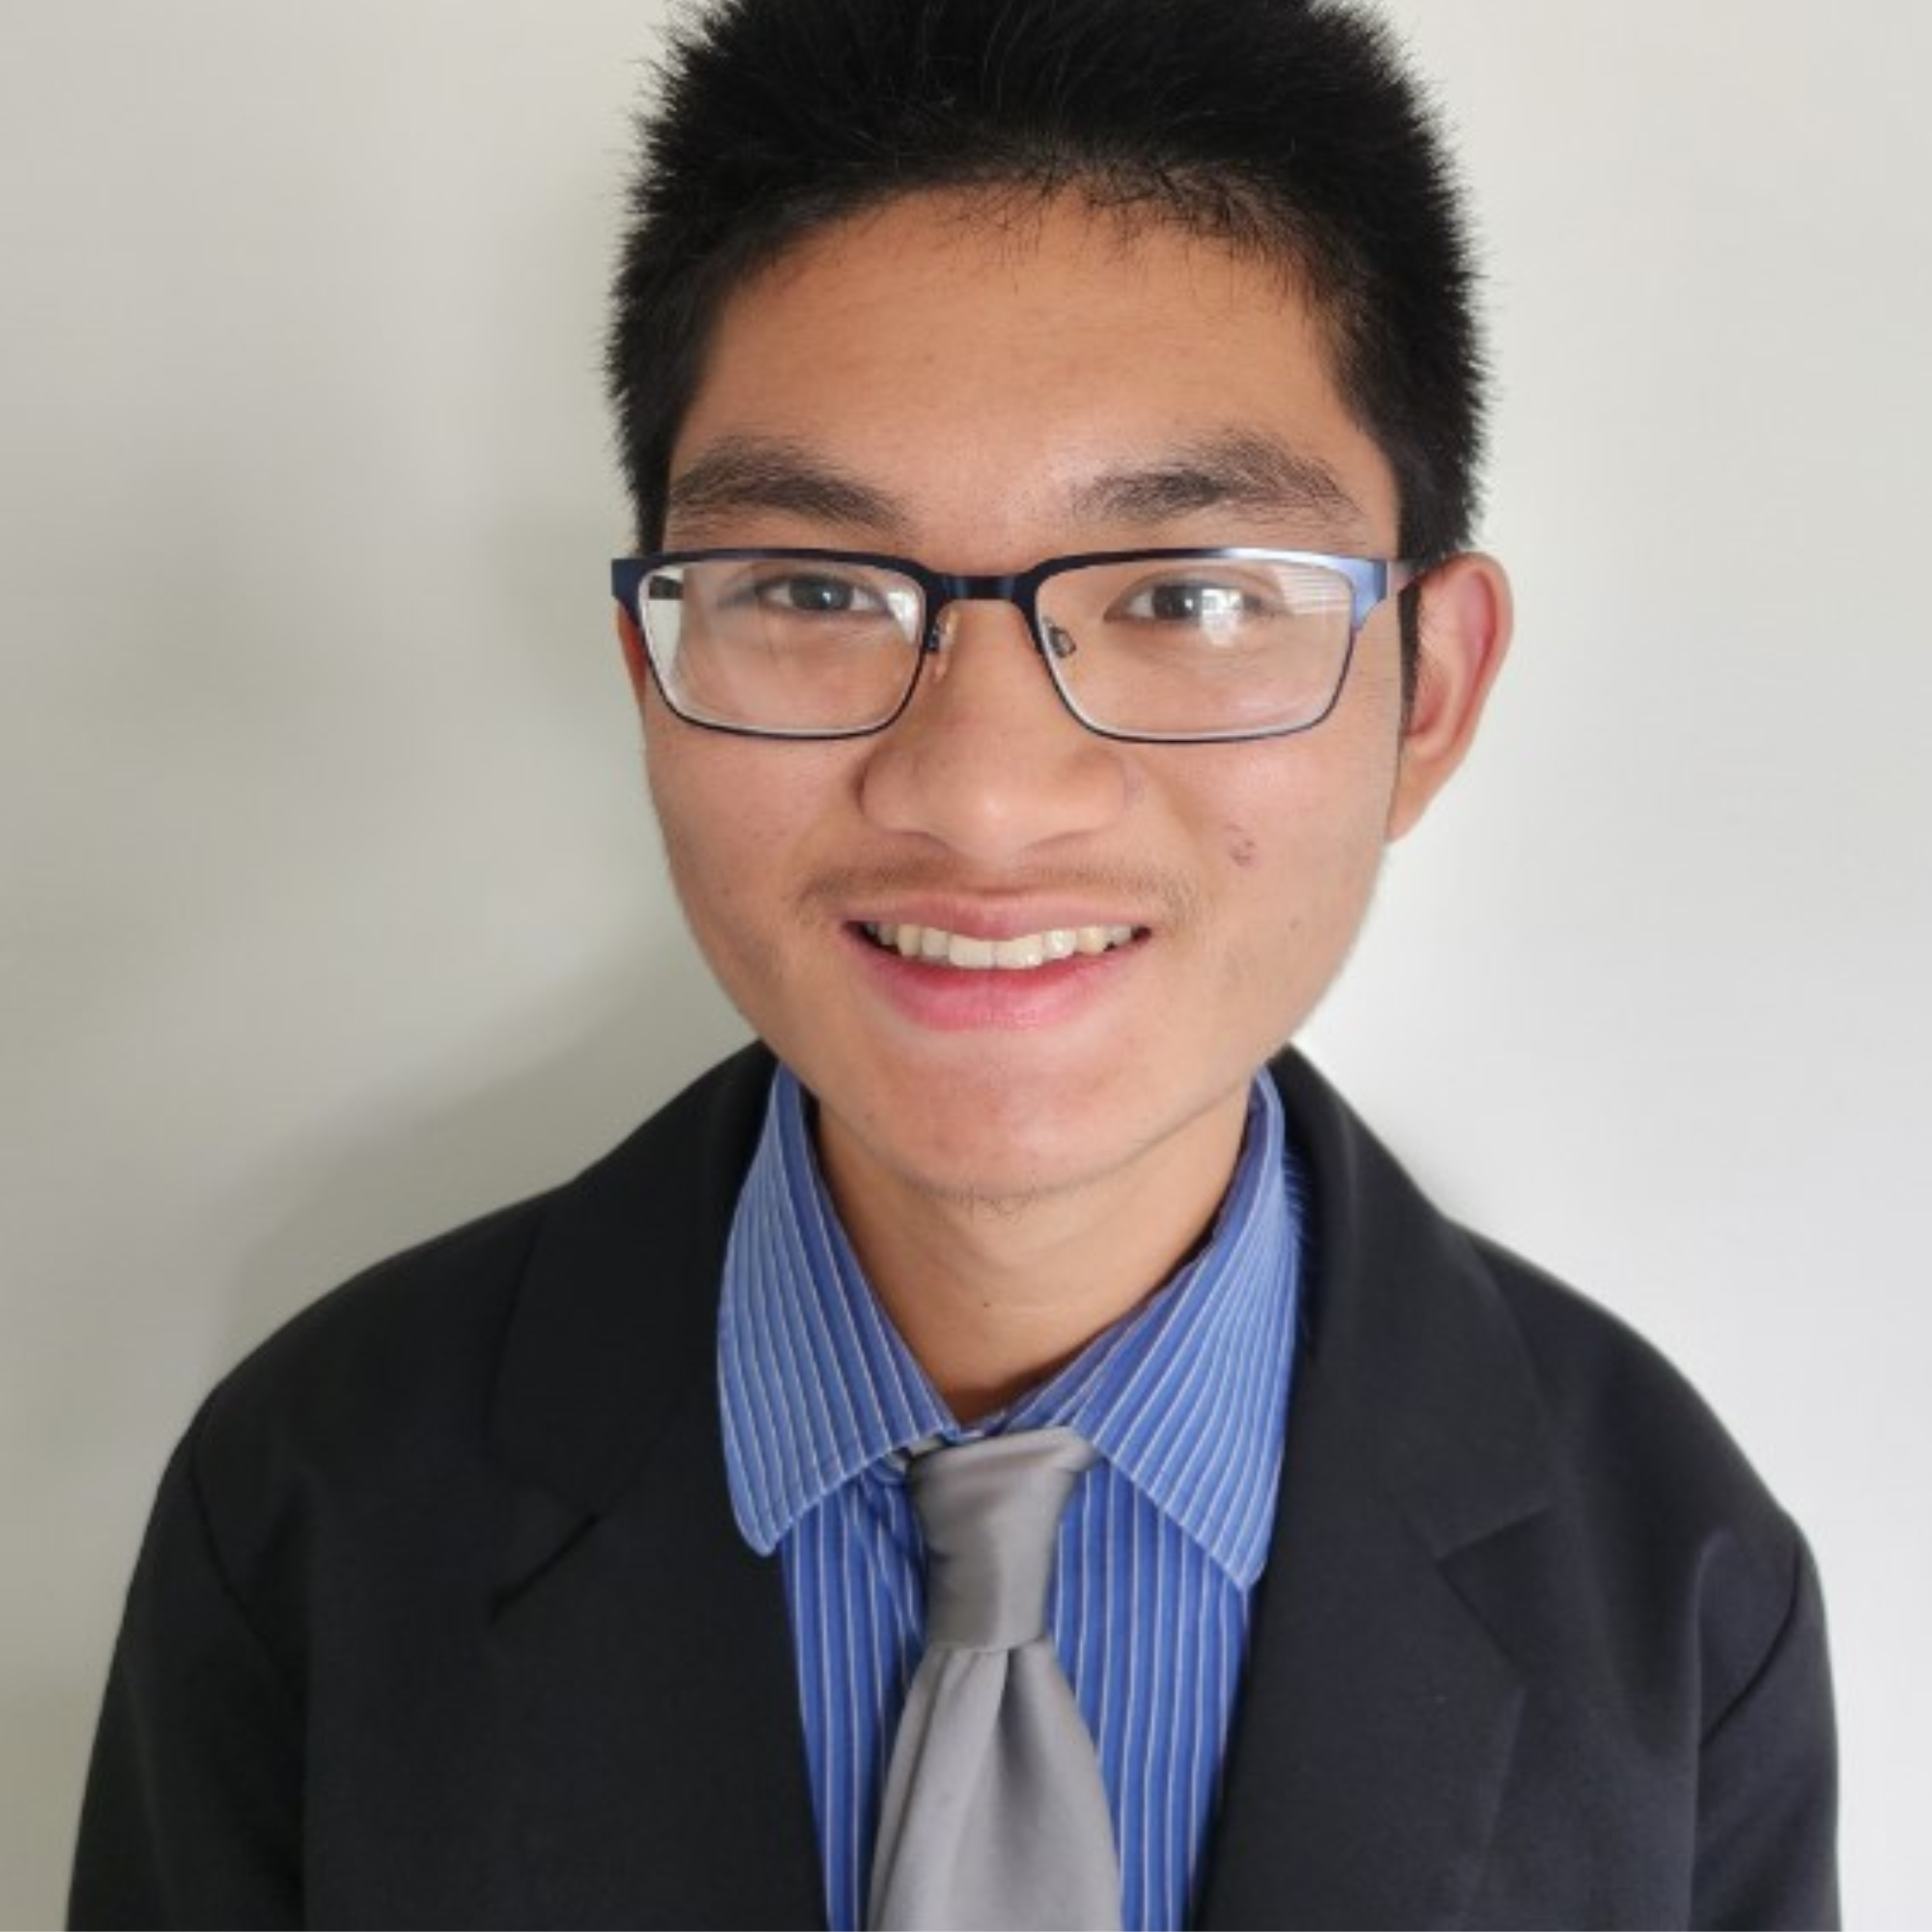 Commitee Chair Ethan Lee